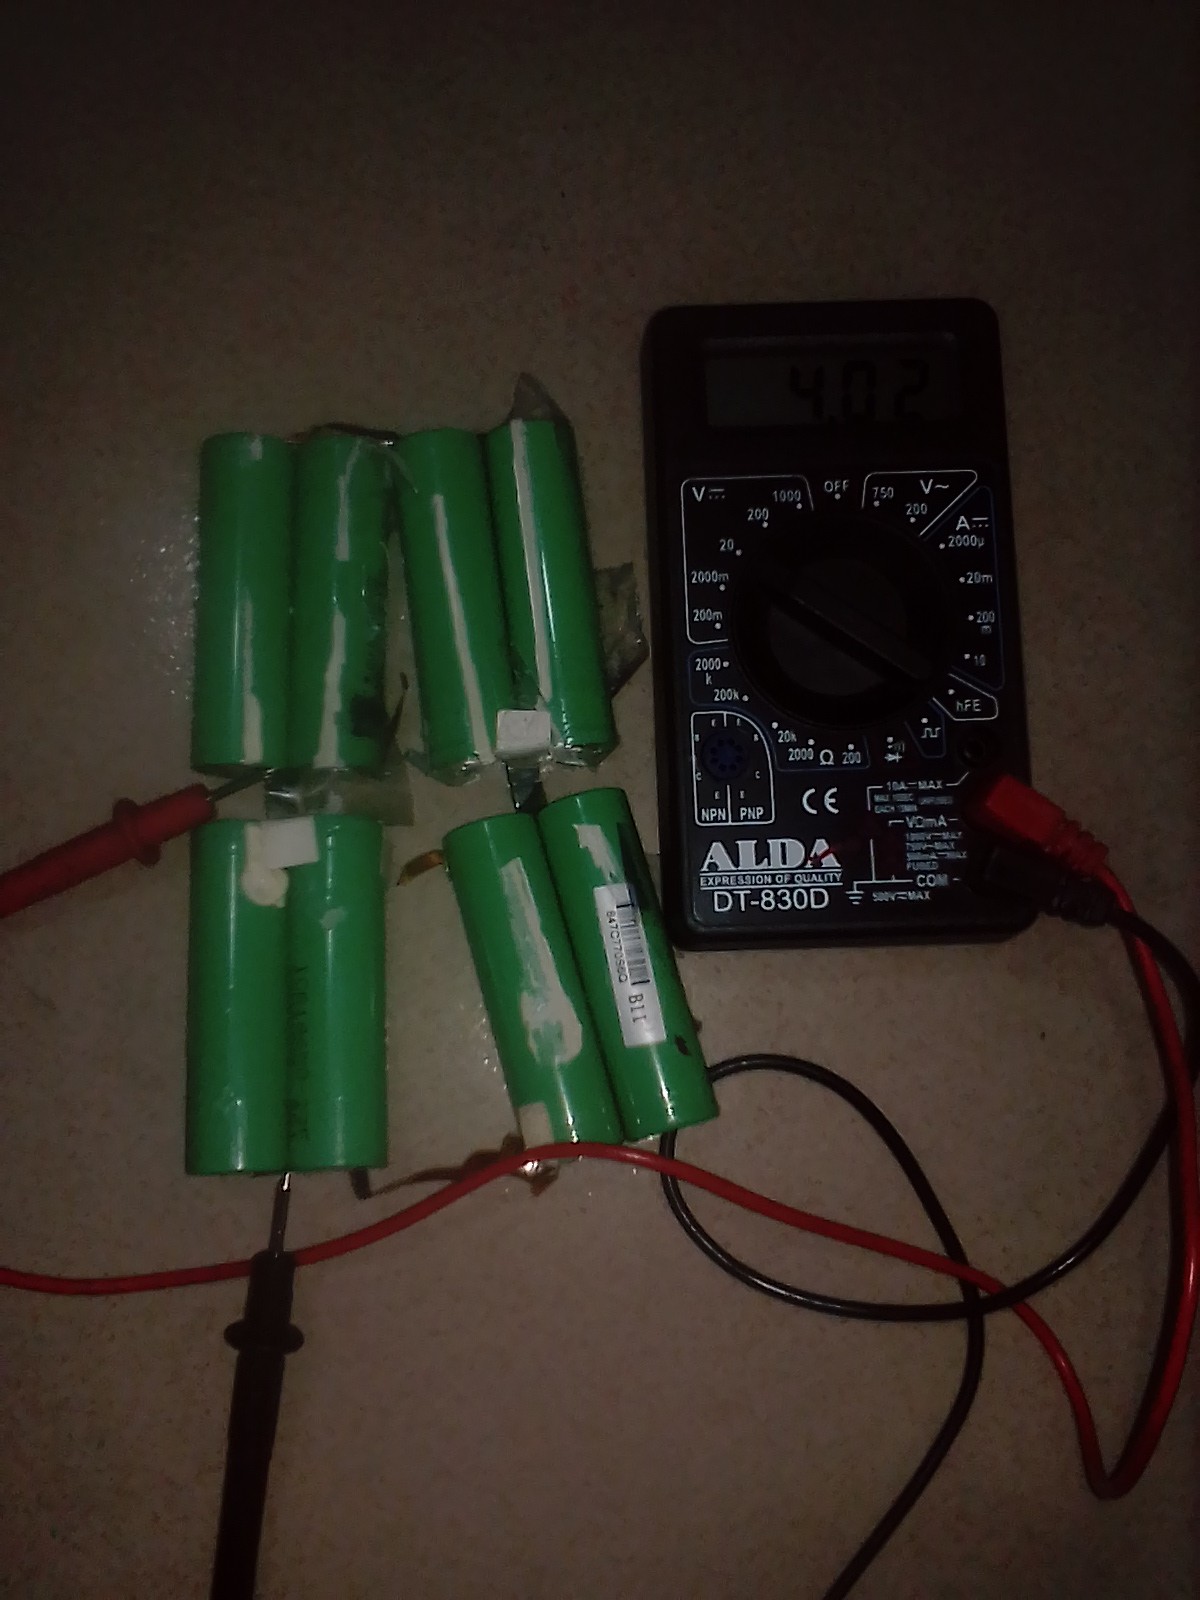 LiFePO4 Cells and Multimeter